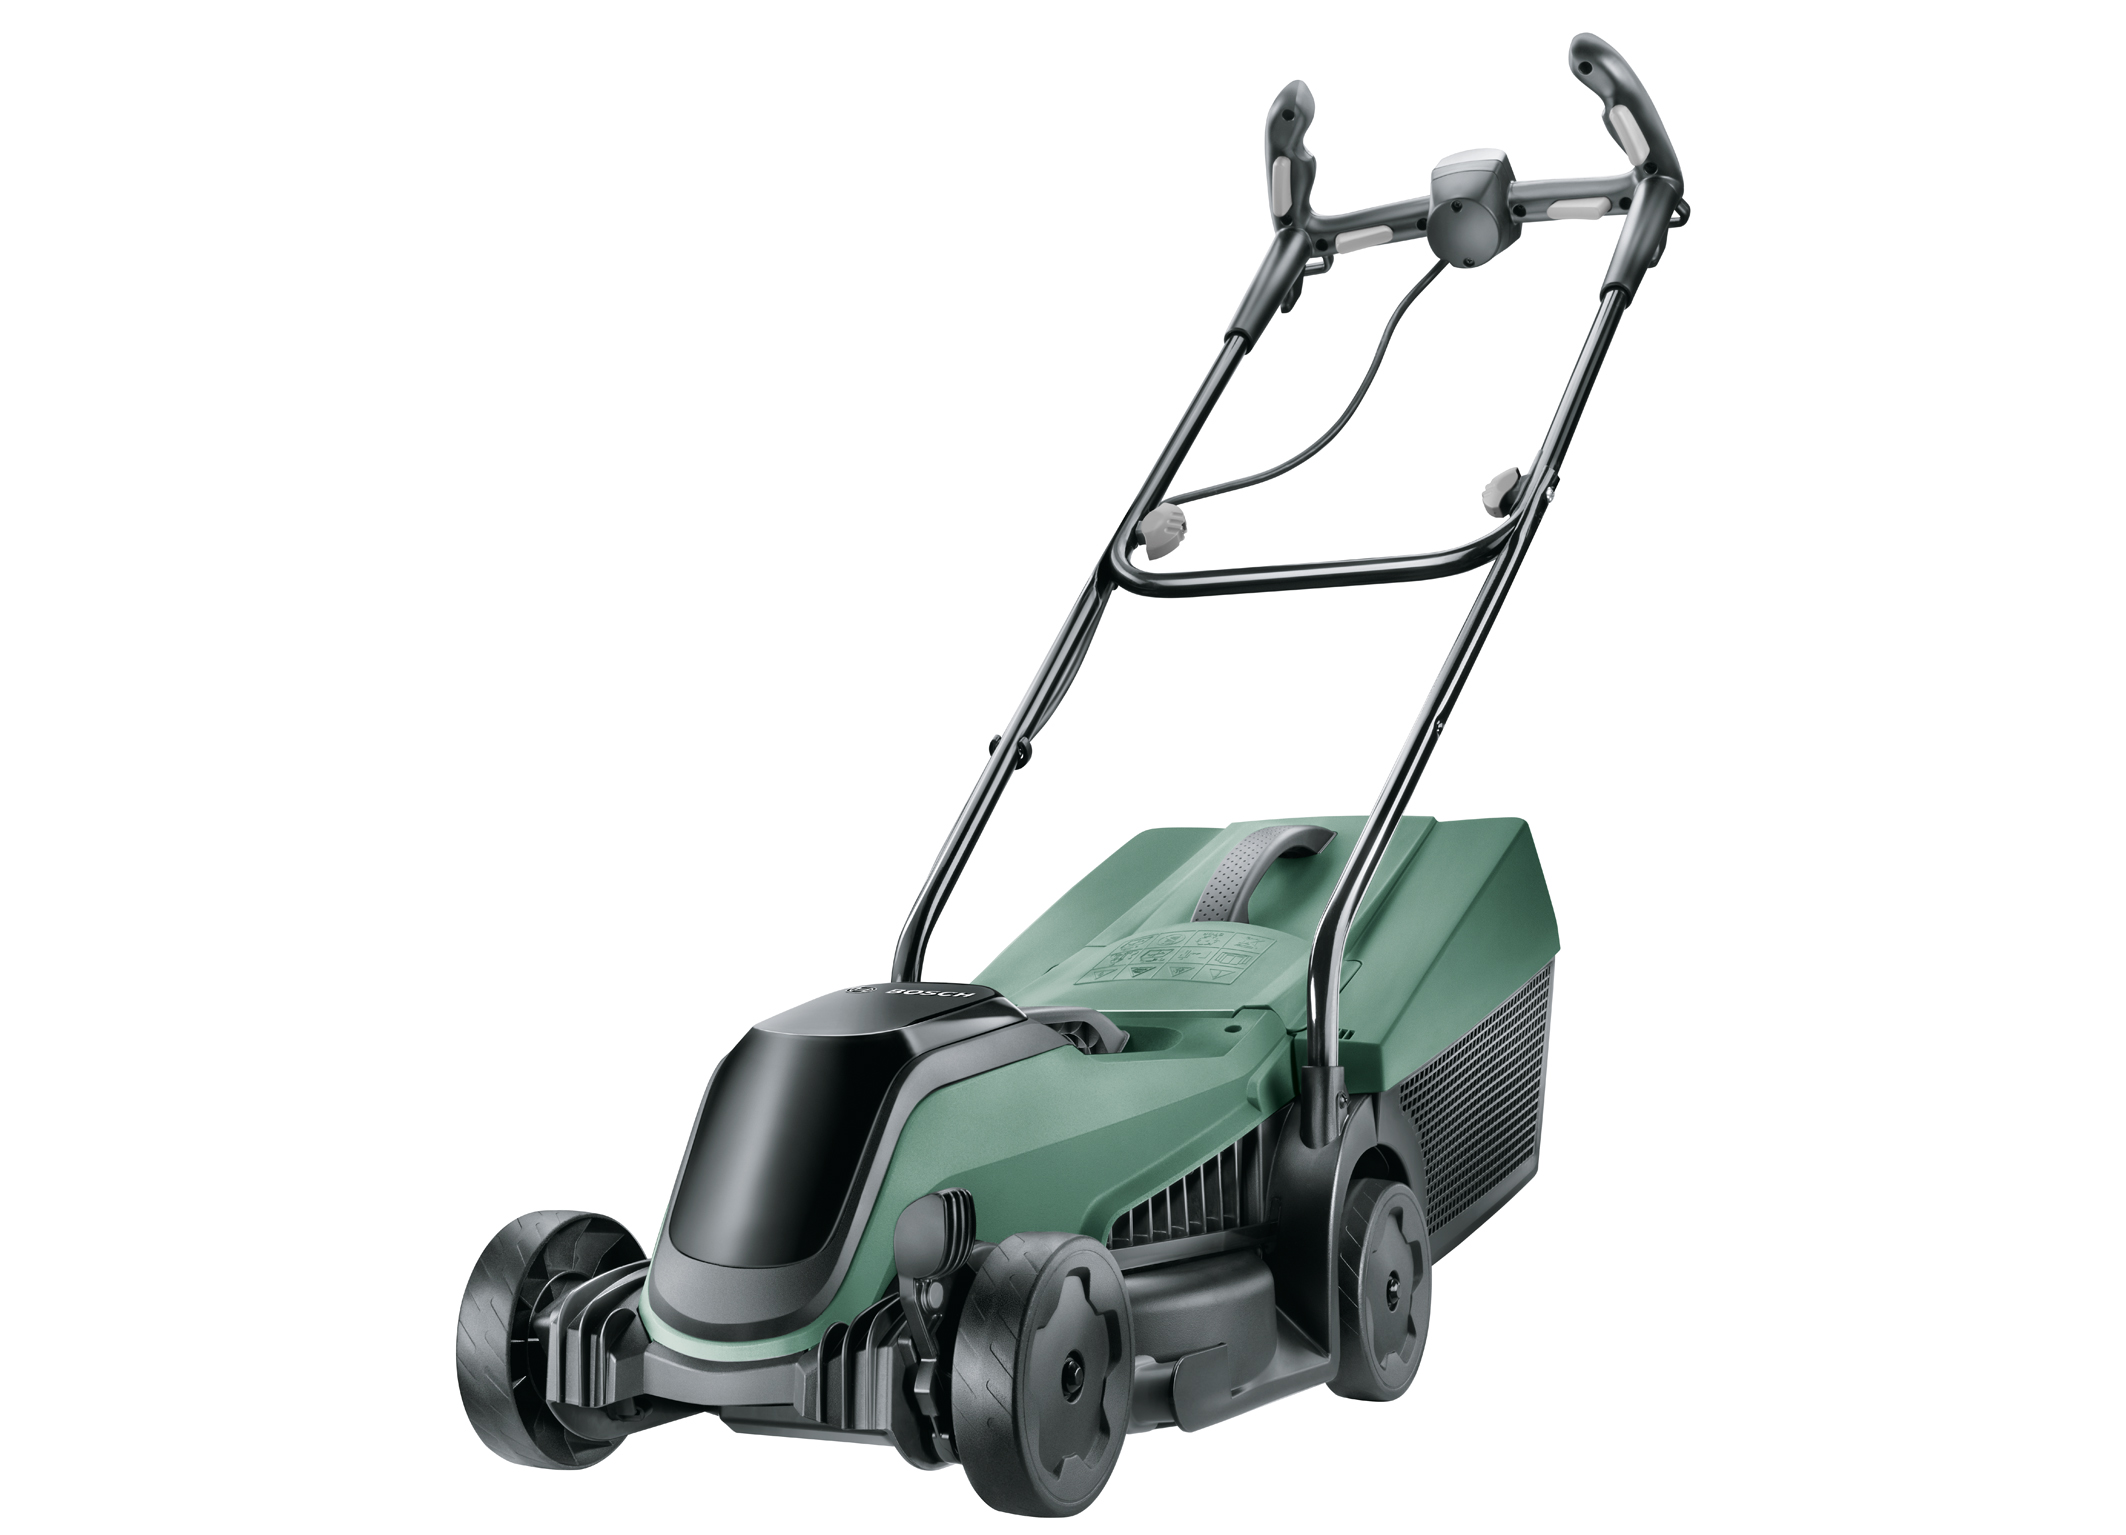 New cordless entry-level mowers from Bosch: The 18 V CityMower for smaller lawns